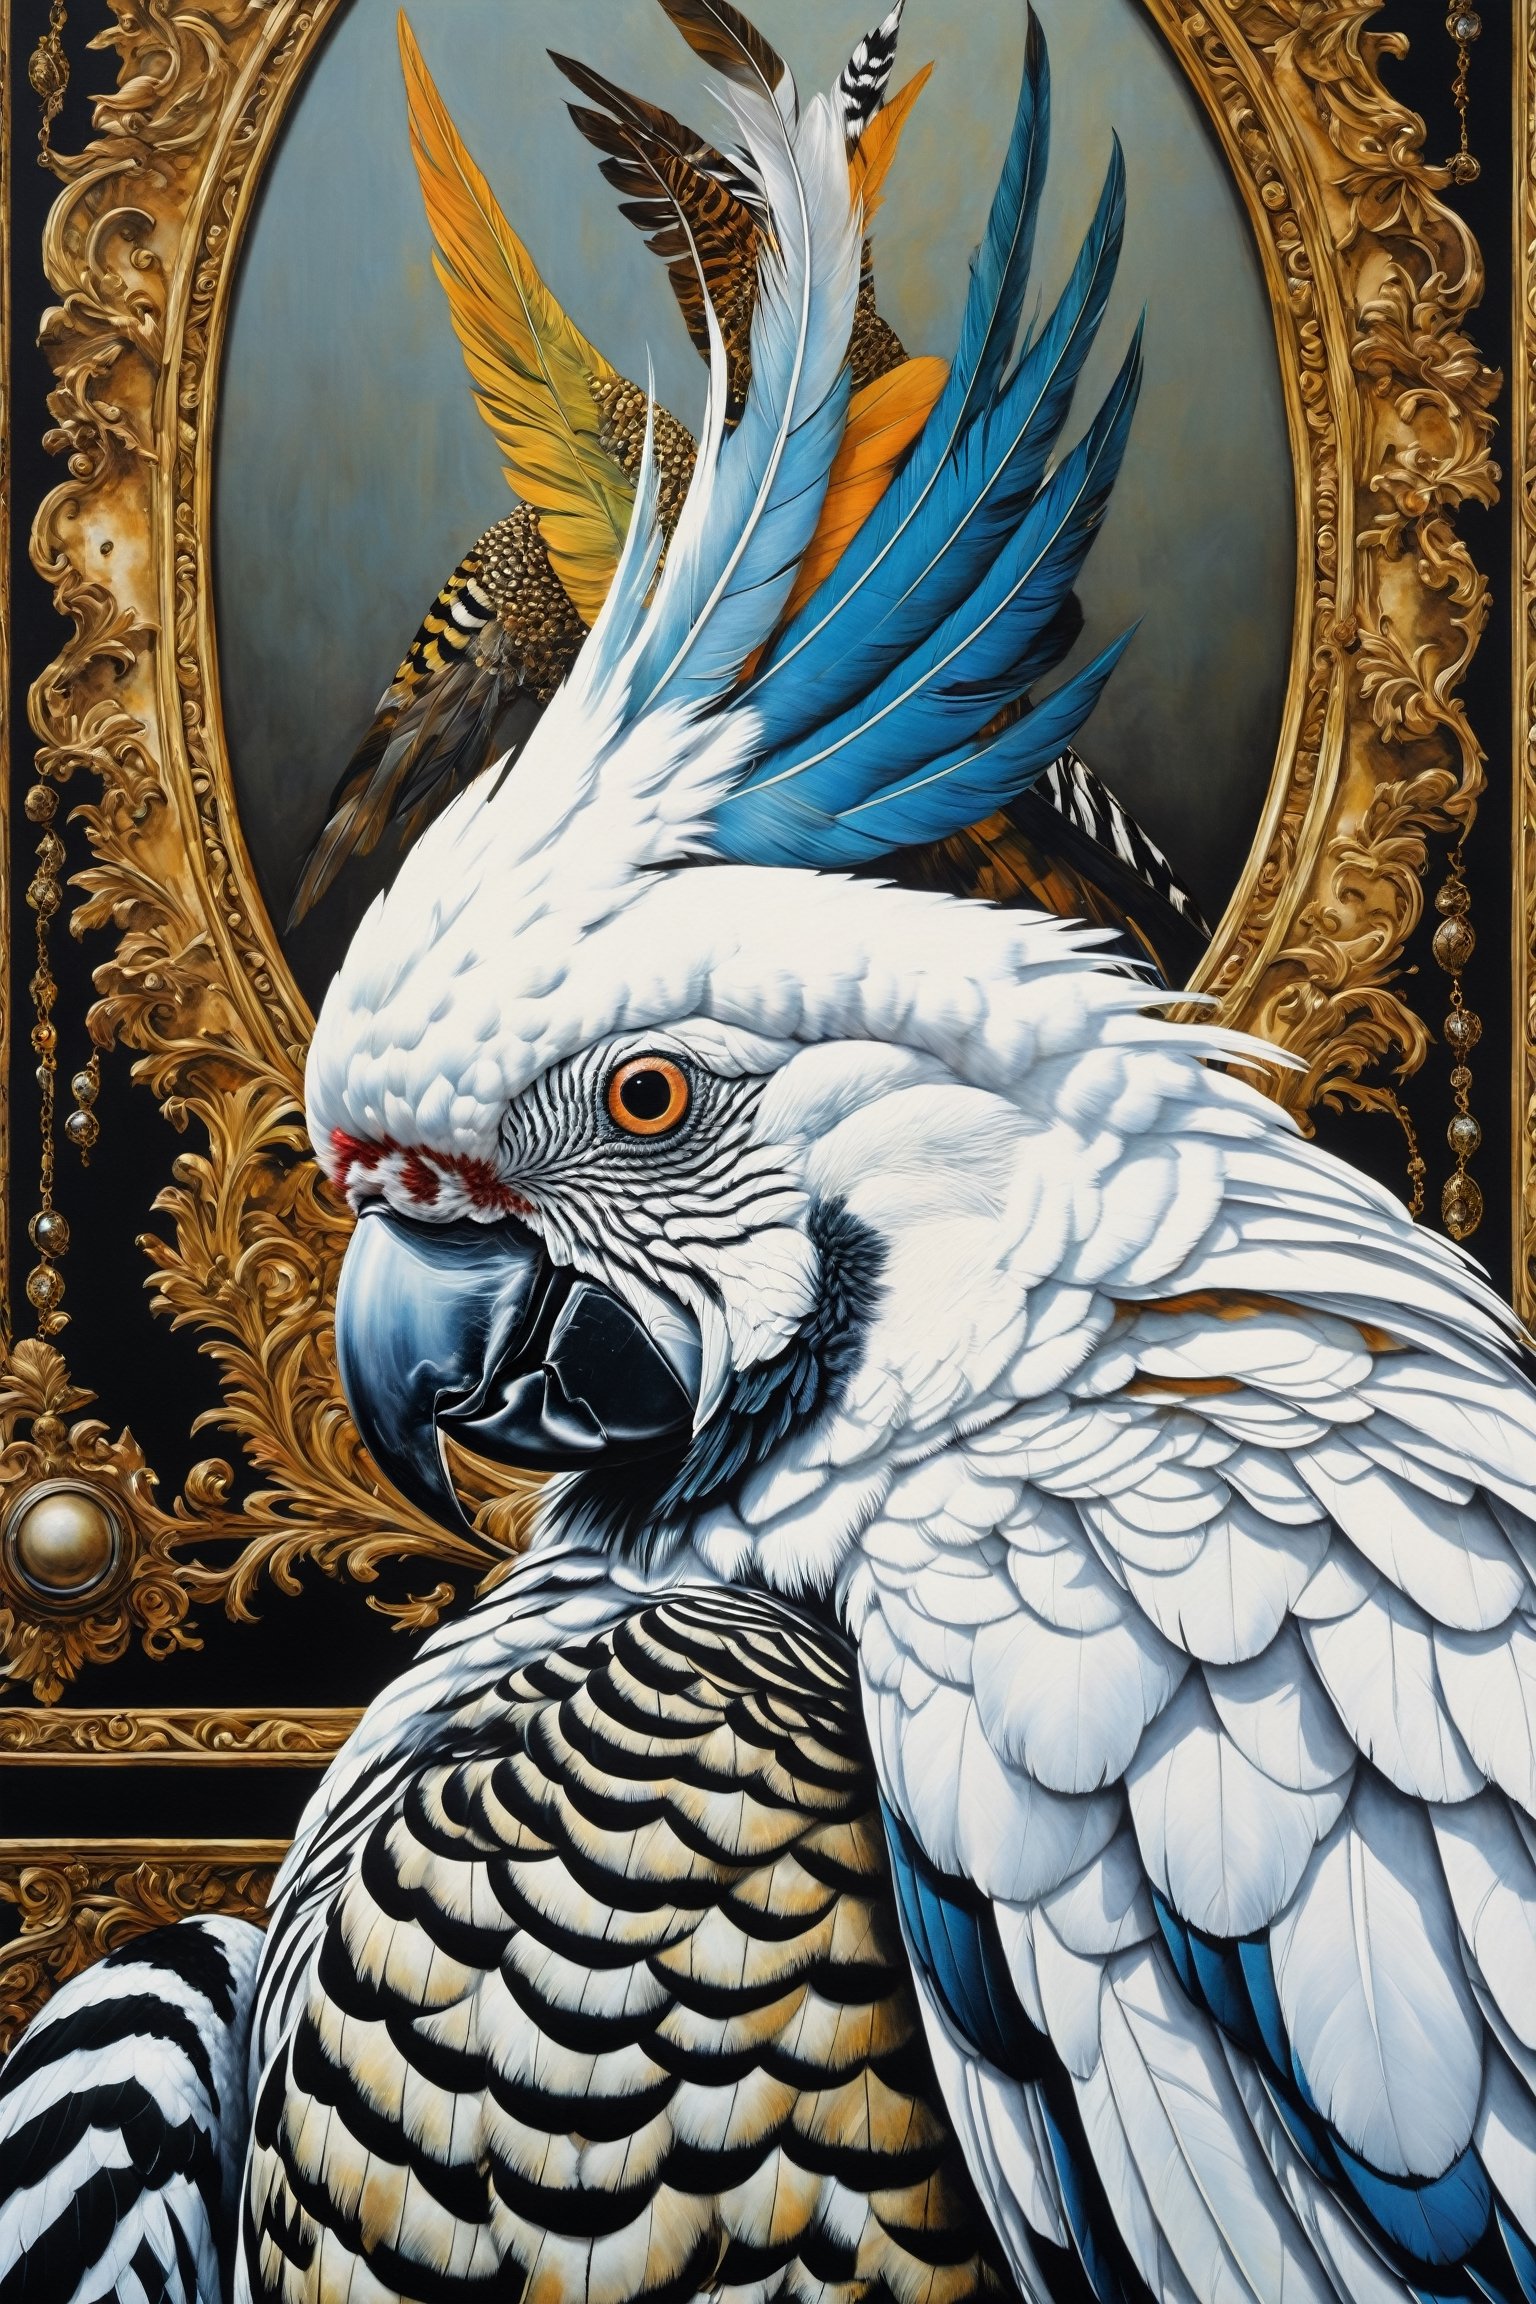 peacocks, zebra stripes,white cockatoo, baroque style, art by sergio toppi, art design by sergio toppi, military poster style, ,more detail XL,close up,Oil painting, 8k, highly detailed, in the style of esao andrews, a clse up oil portrait of a beautiful group of birds, 